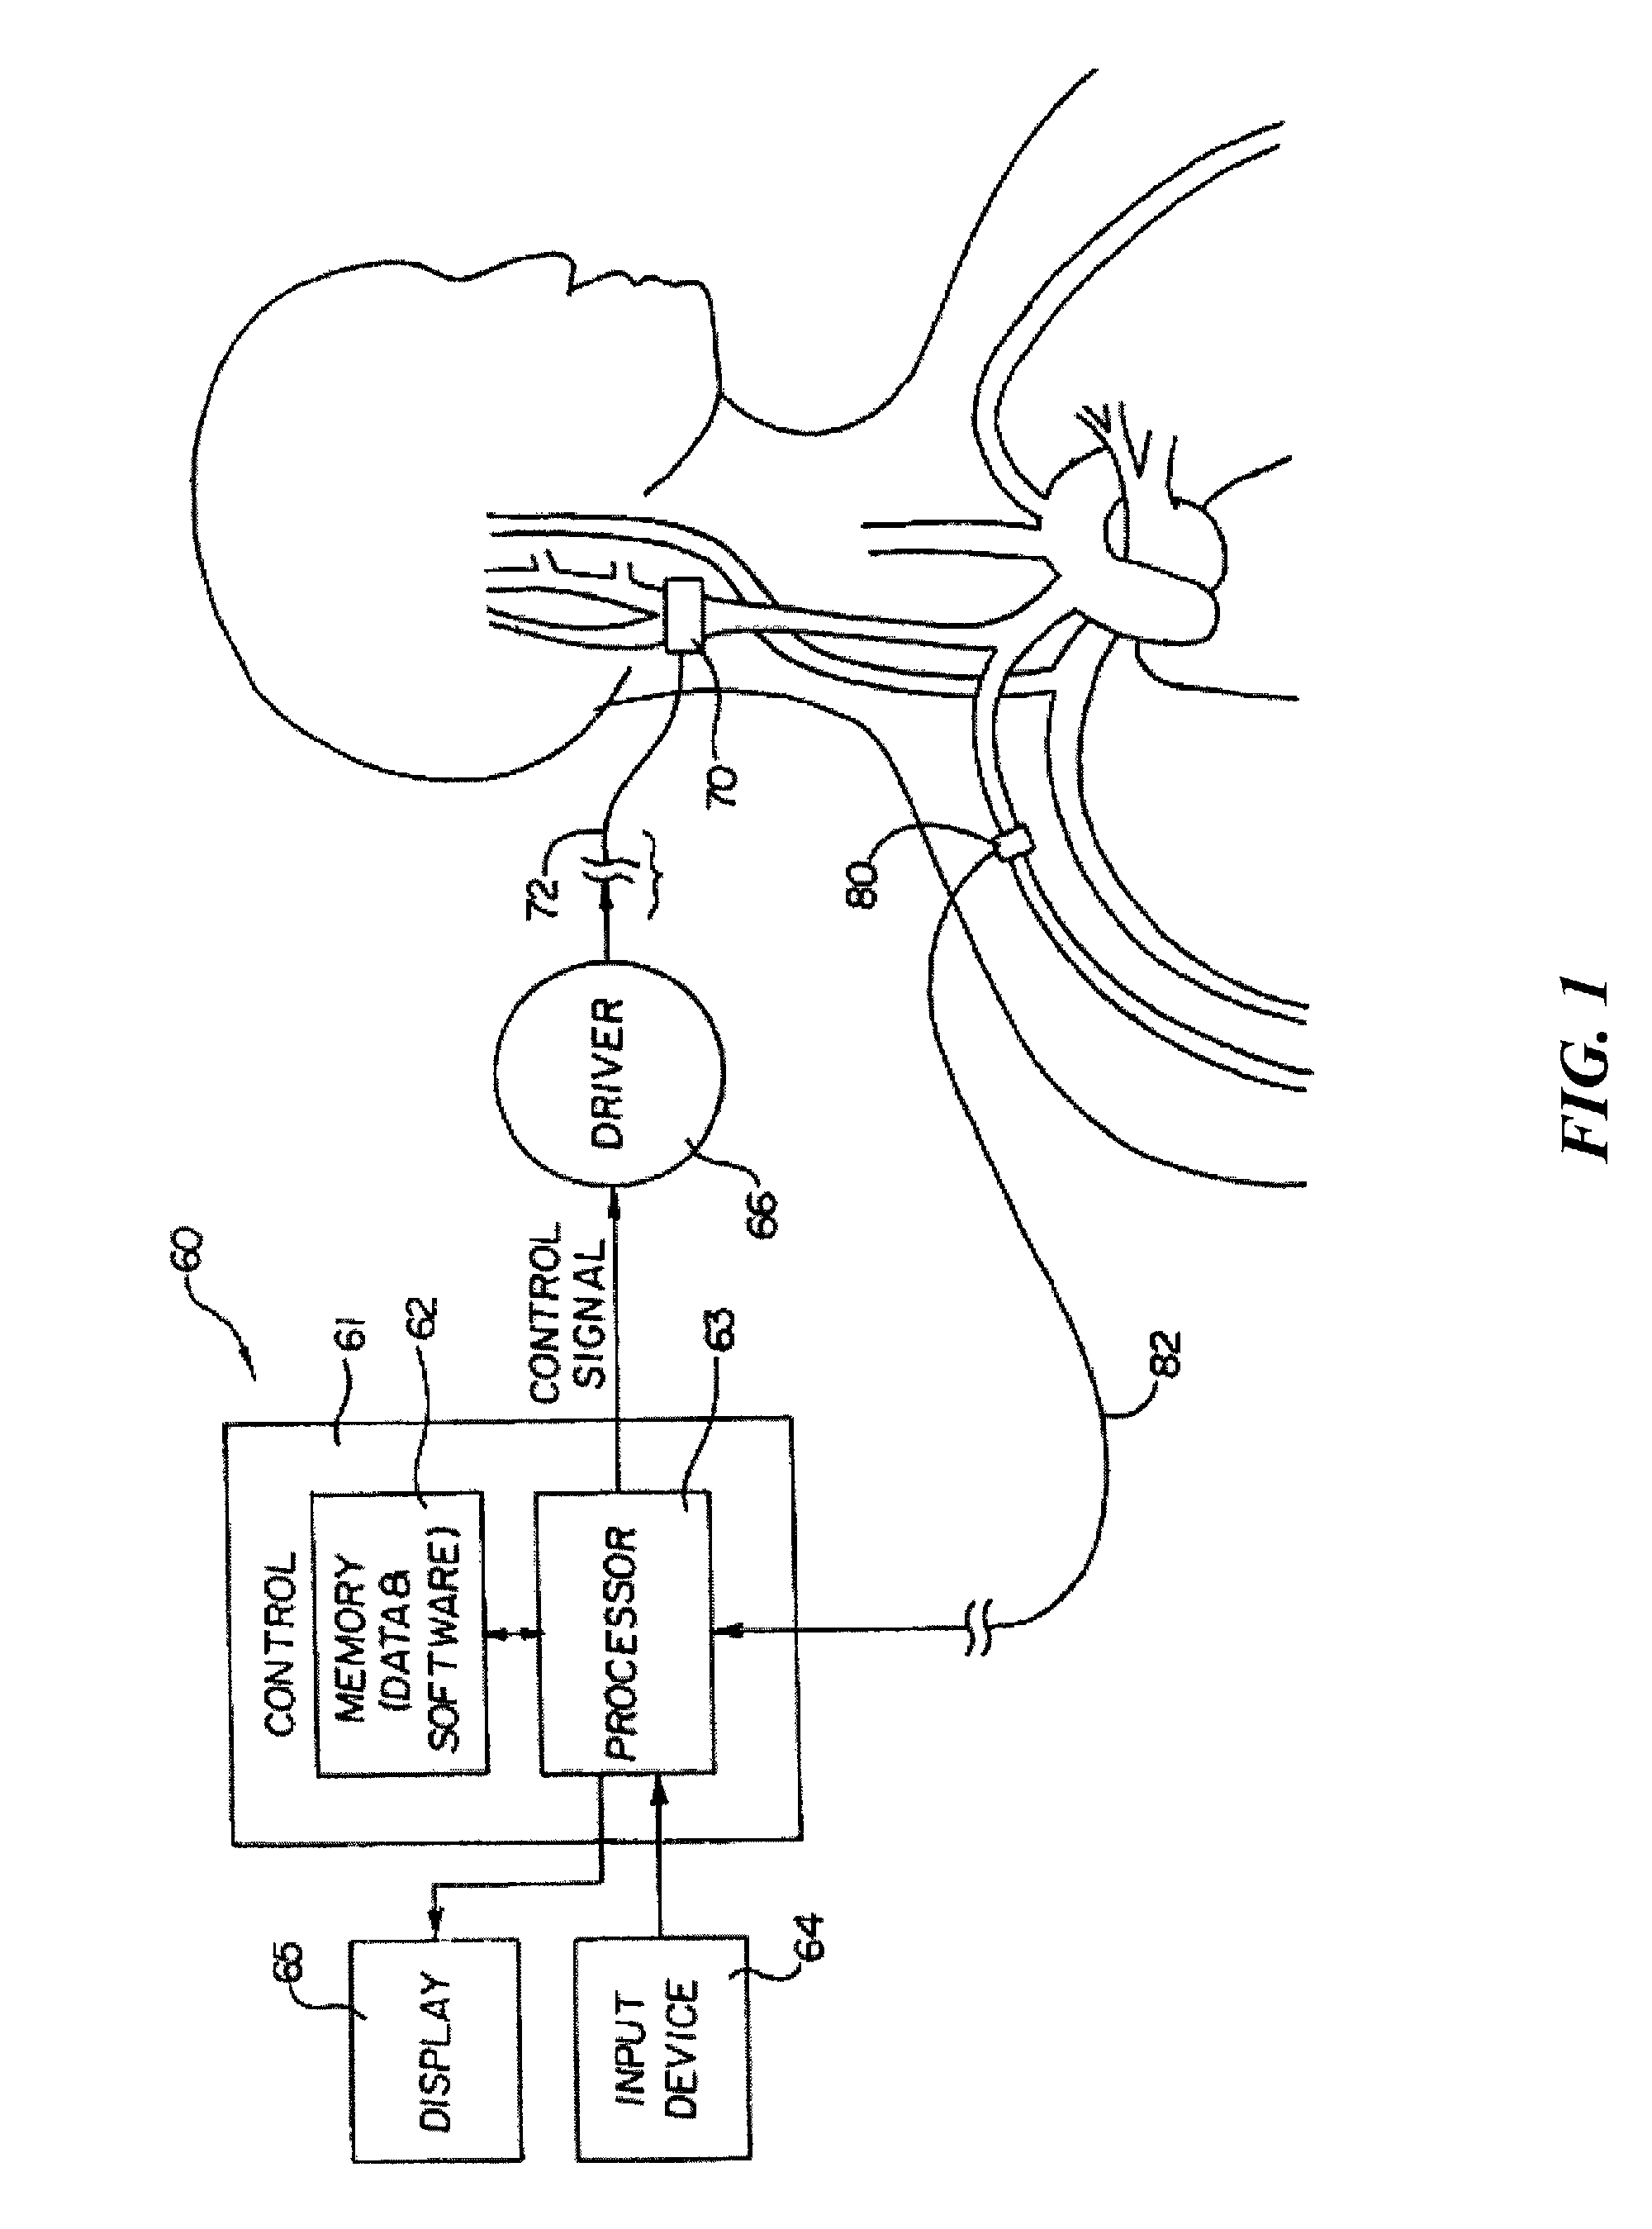 Elective service indicator based on pulse count for implantable device